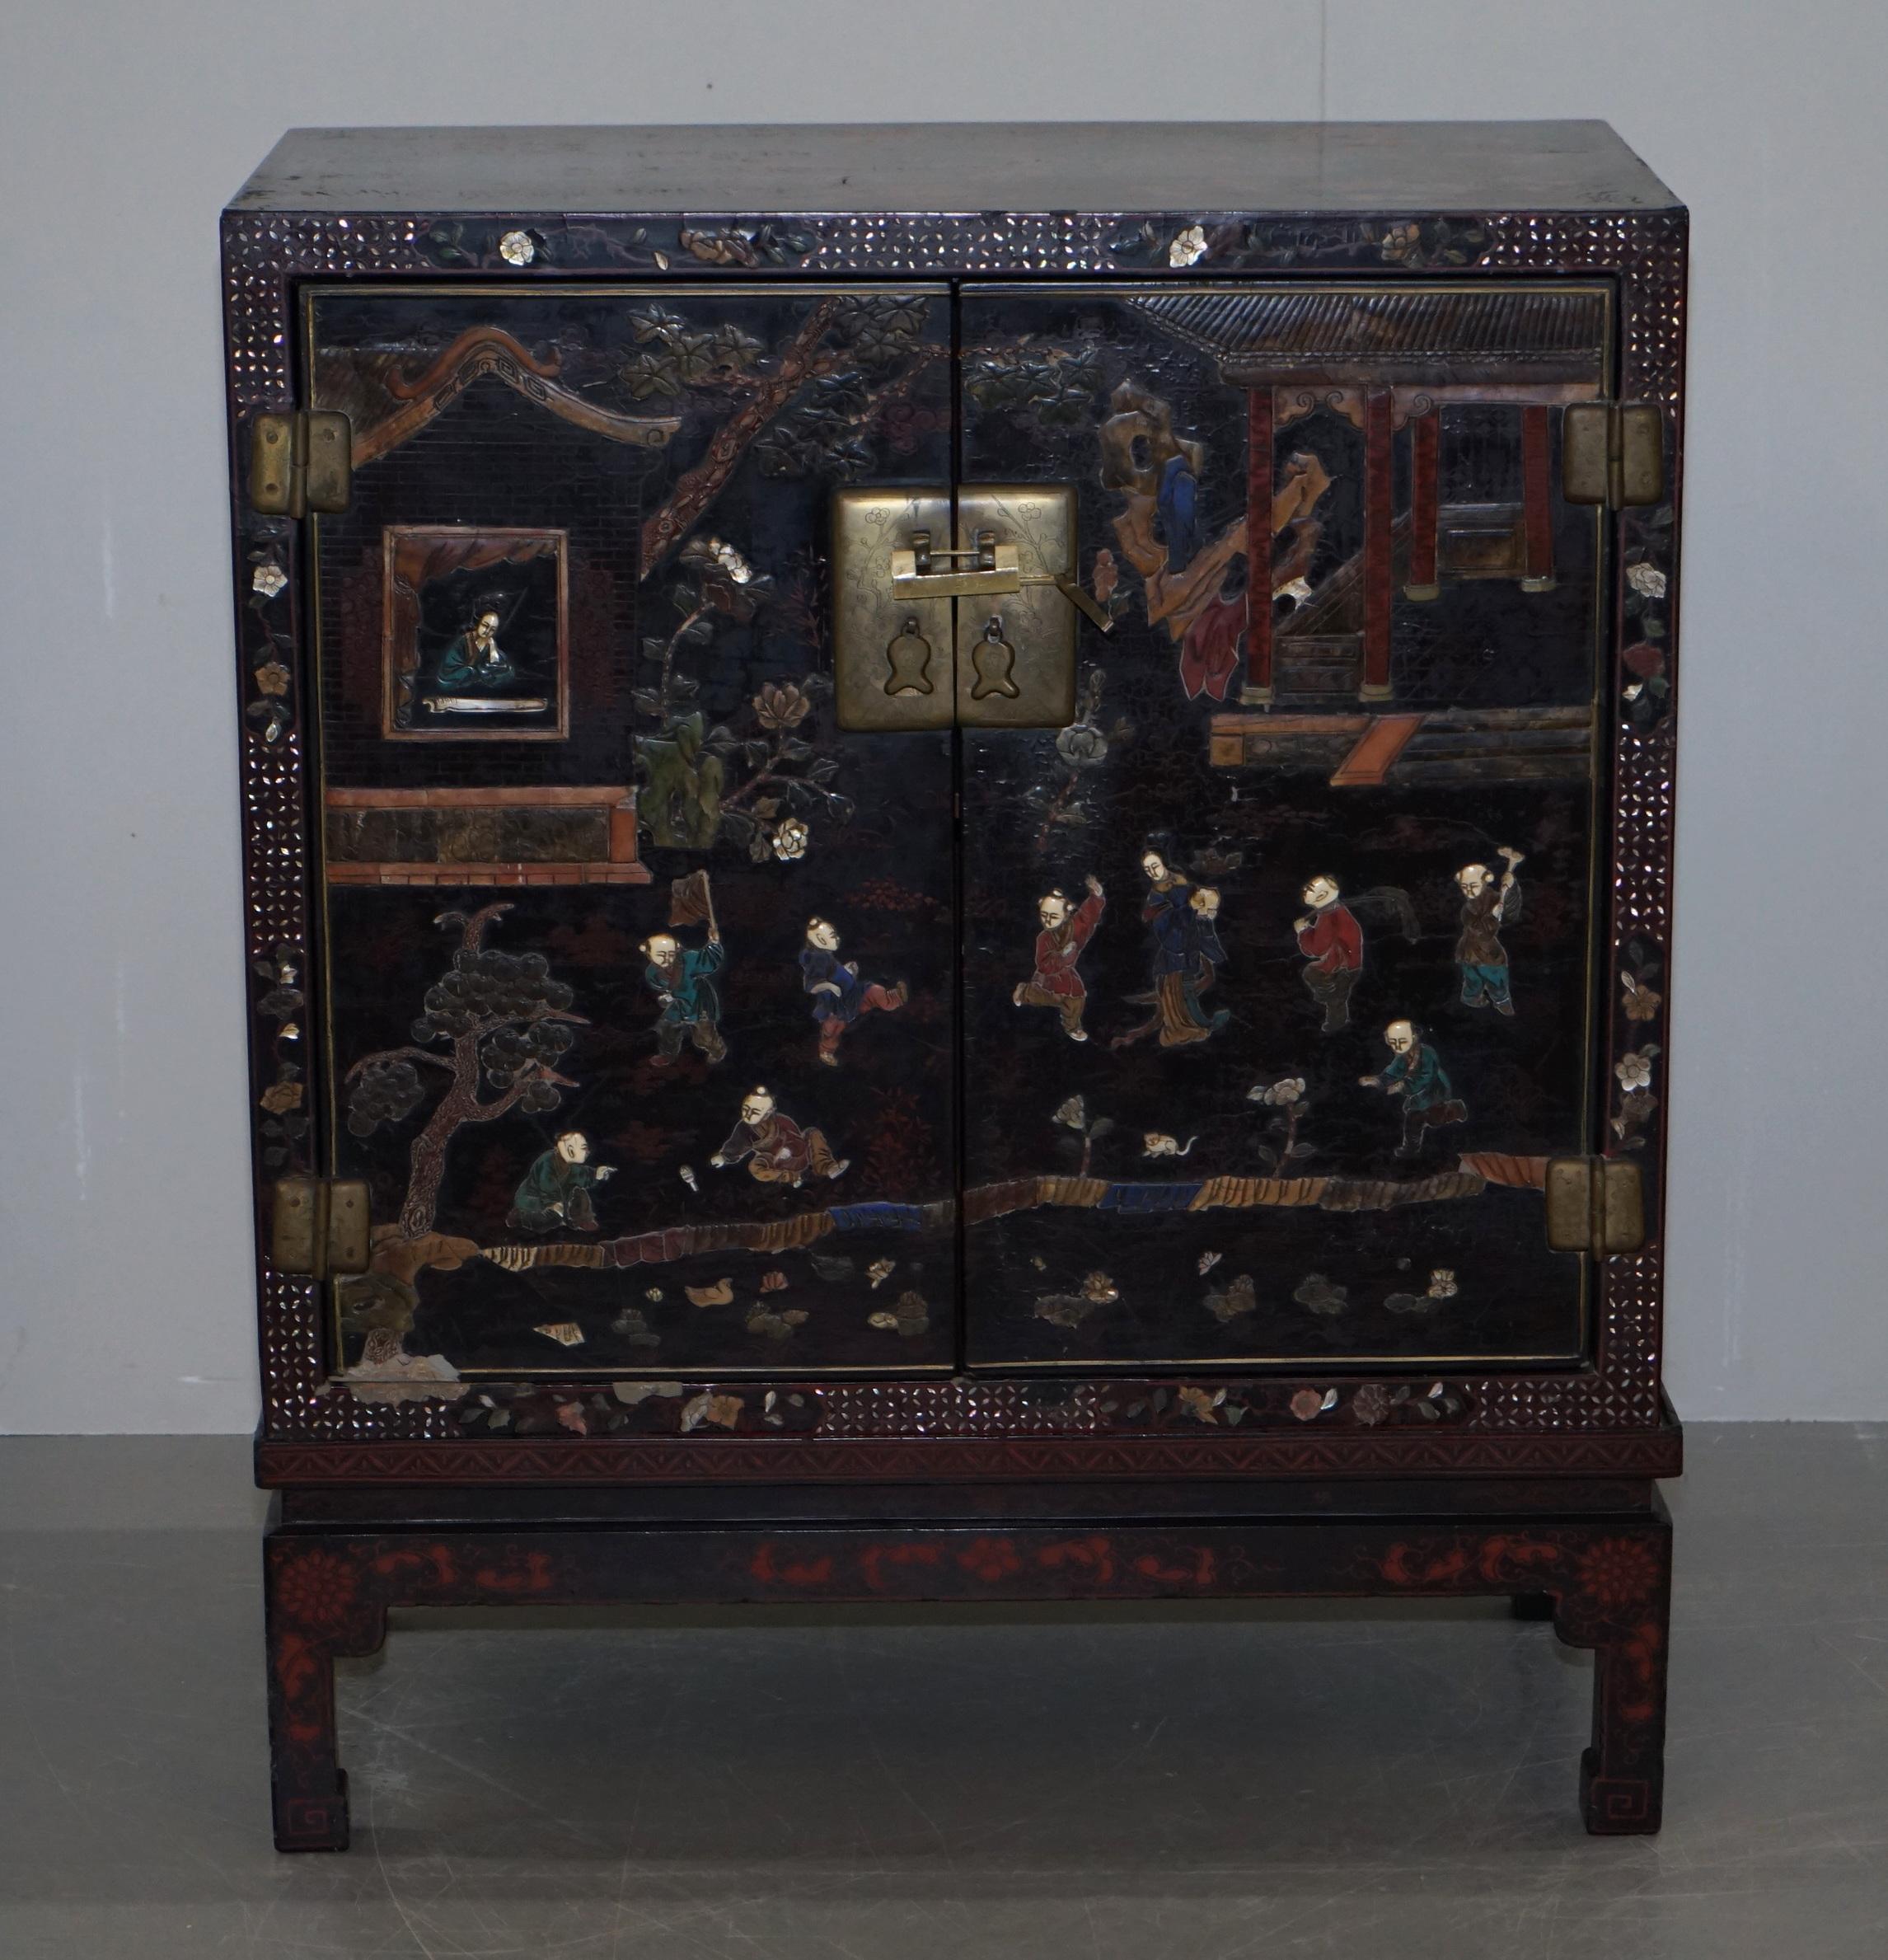 We are delighted to offer for sale this exquisite 19th century circa 1860 Chinese mother of pearl inlaid with ornately carved panels and lacquer finish cupboard

A very rare collectable and decorative cupboard on stand. This is a mid Victorian